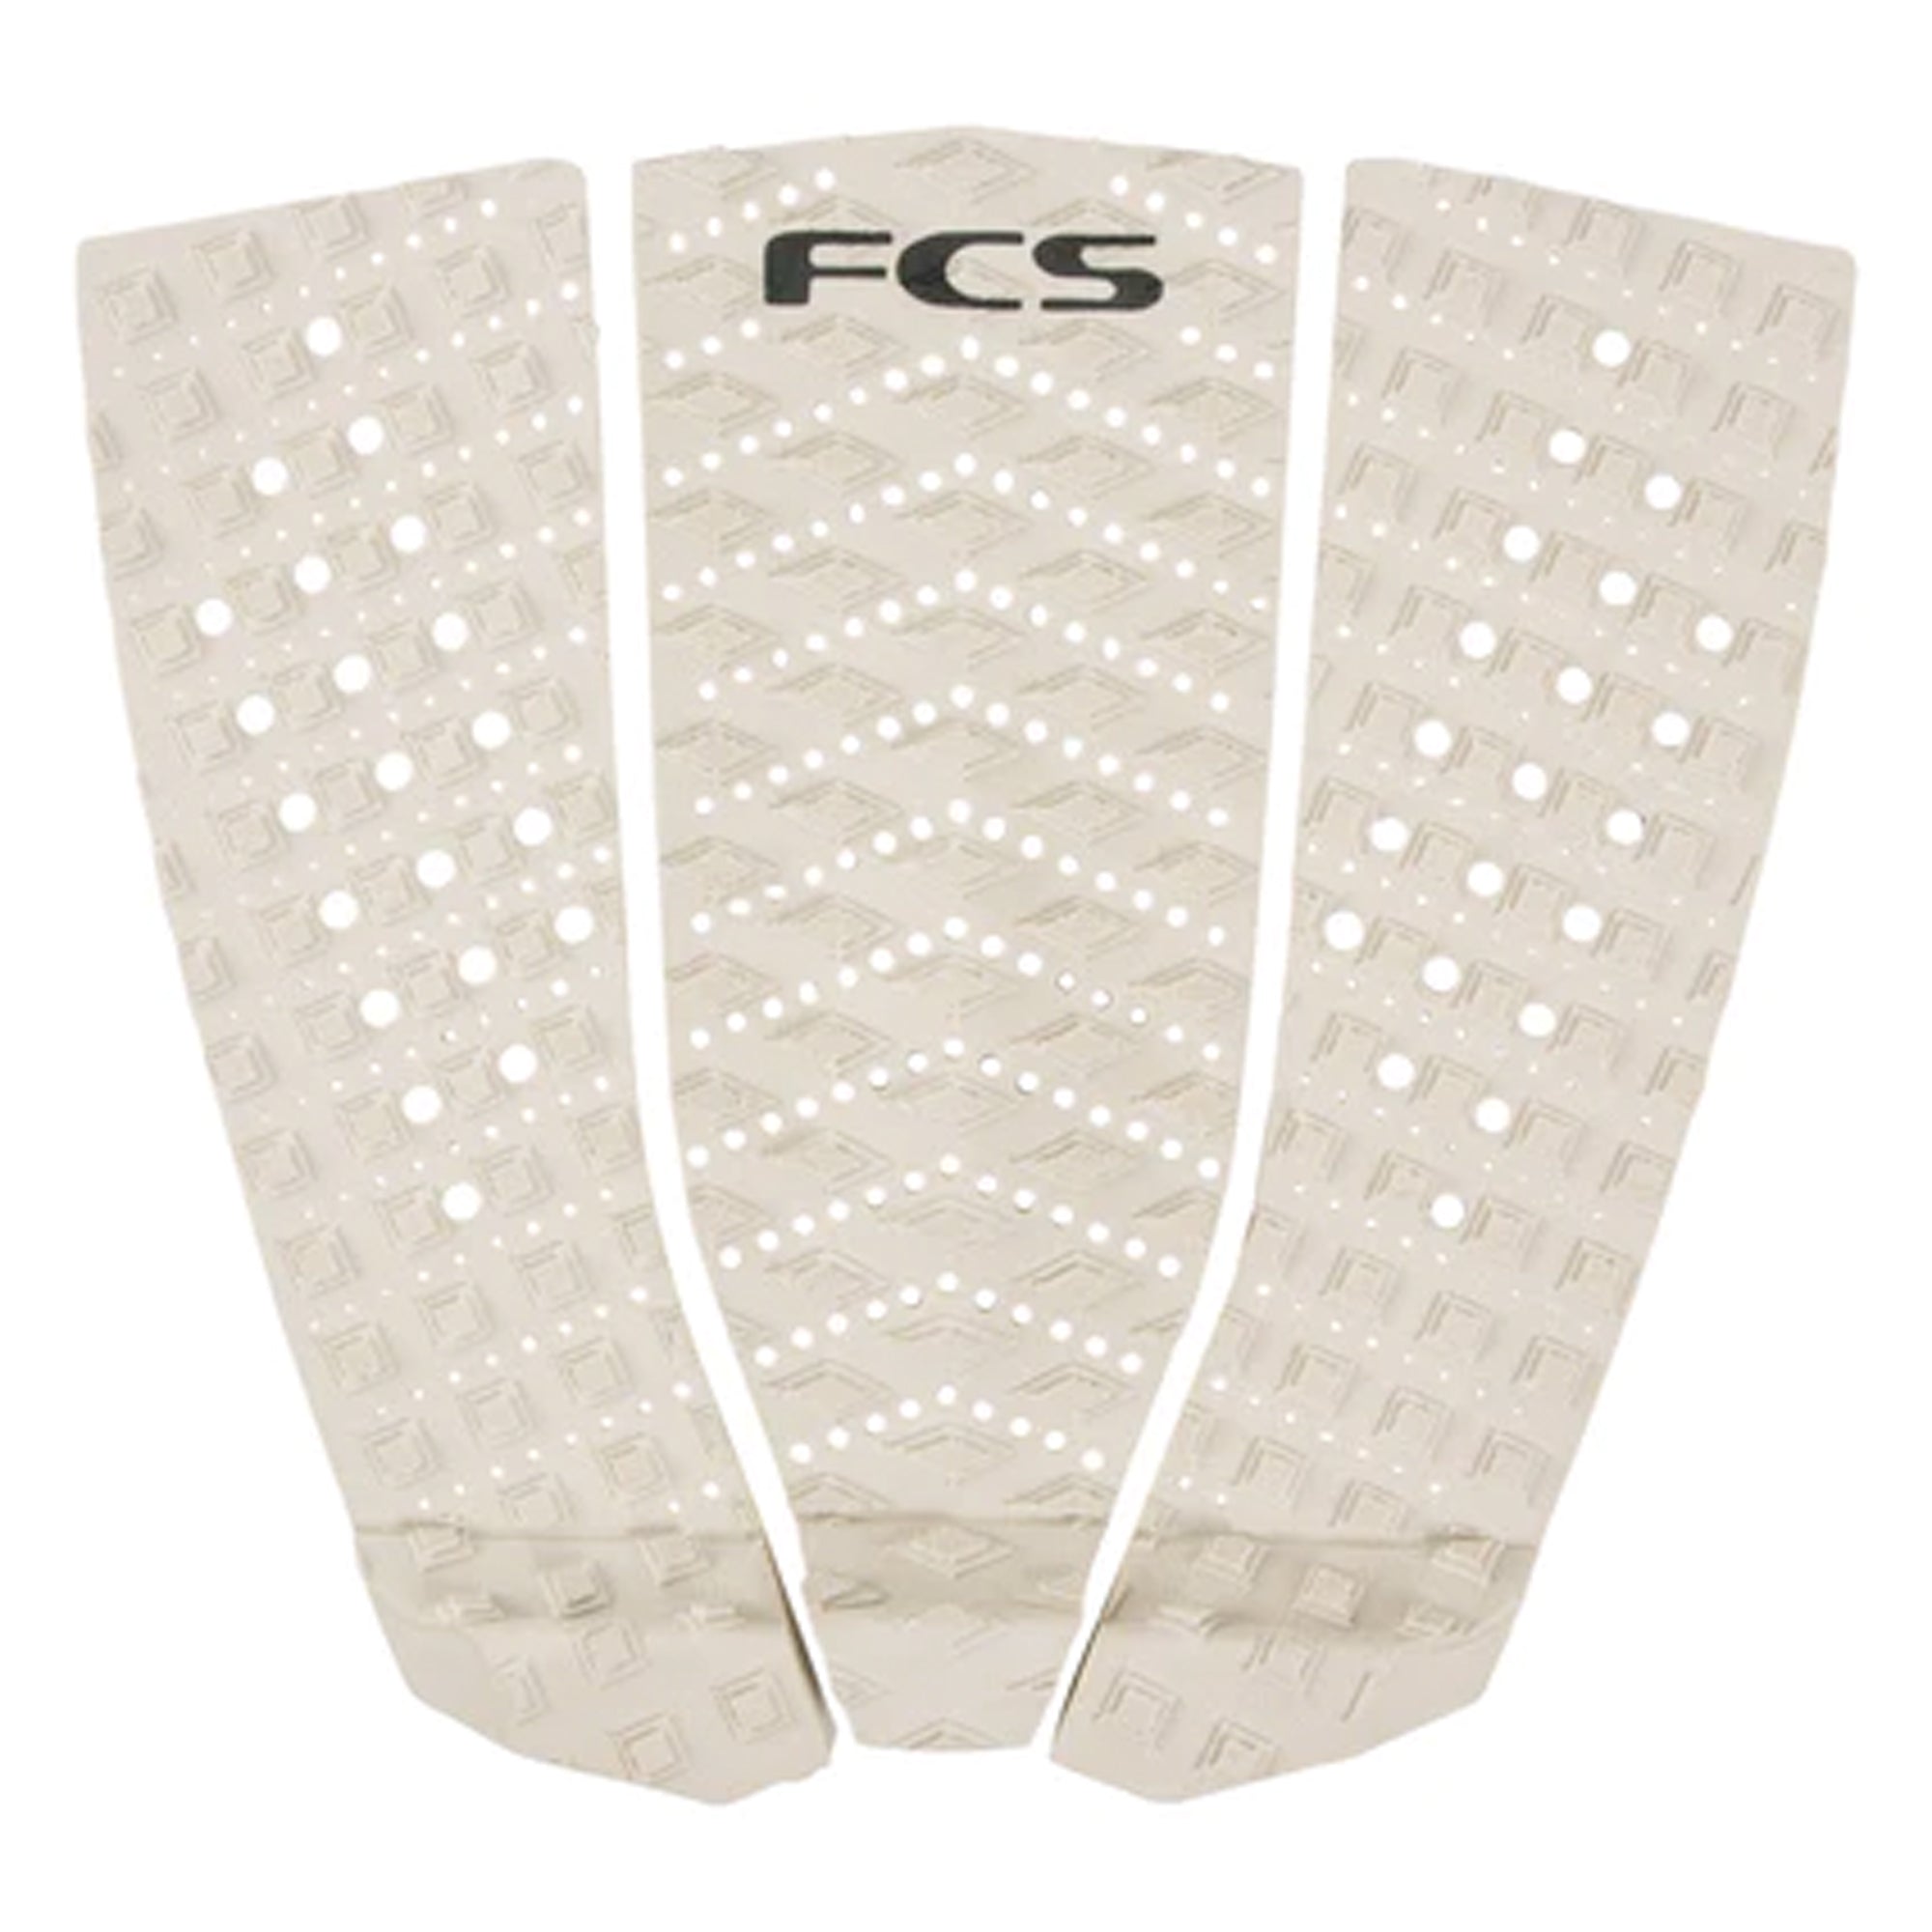 FCS T-3W ECO Traction Pad